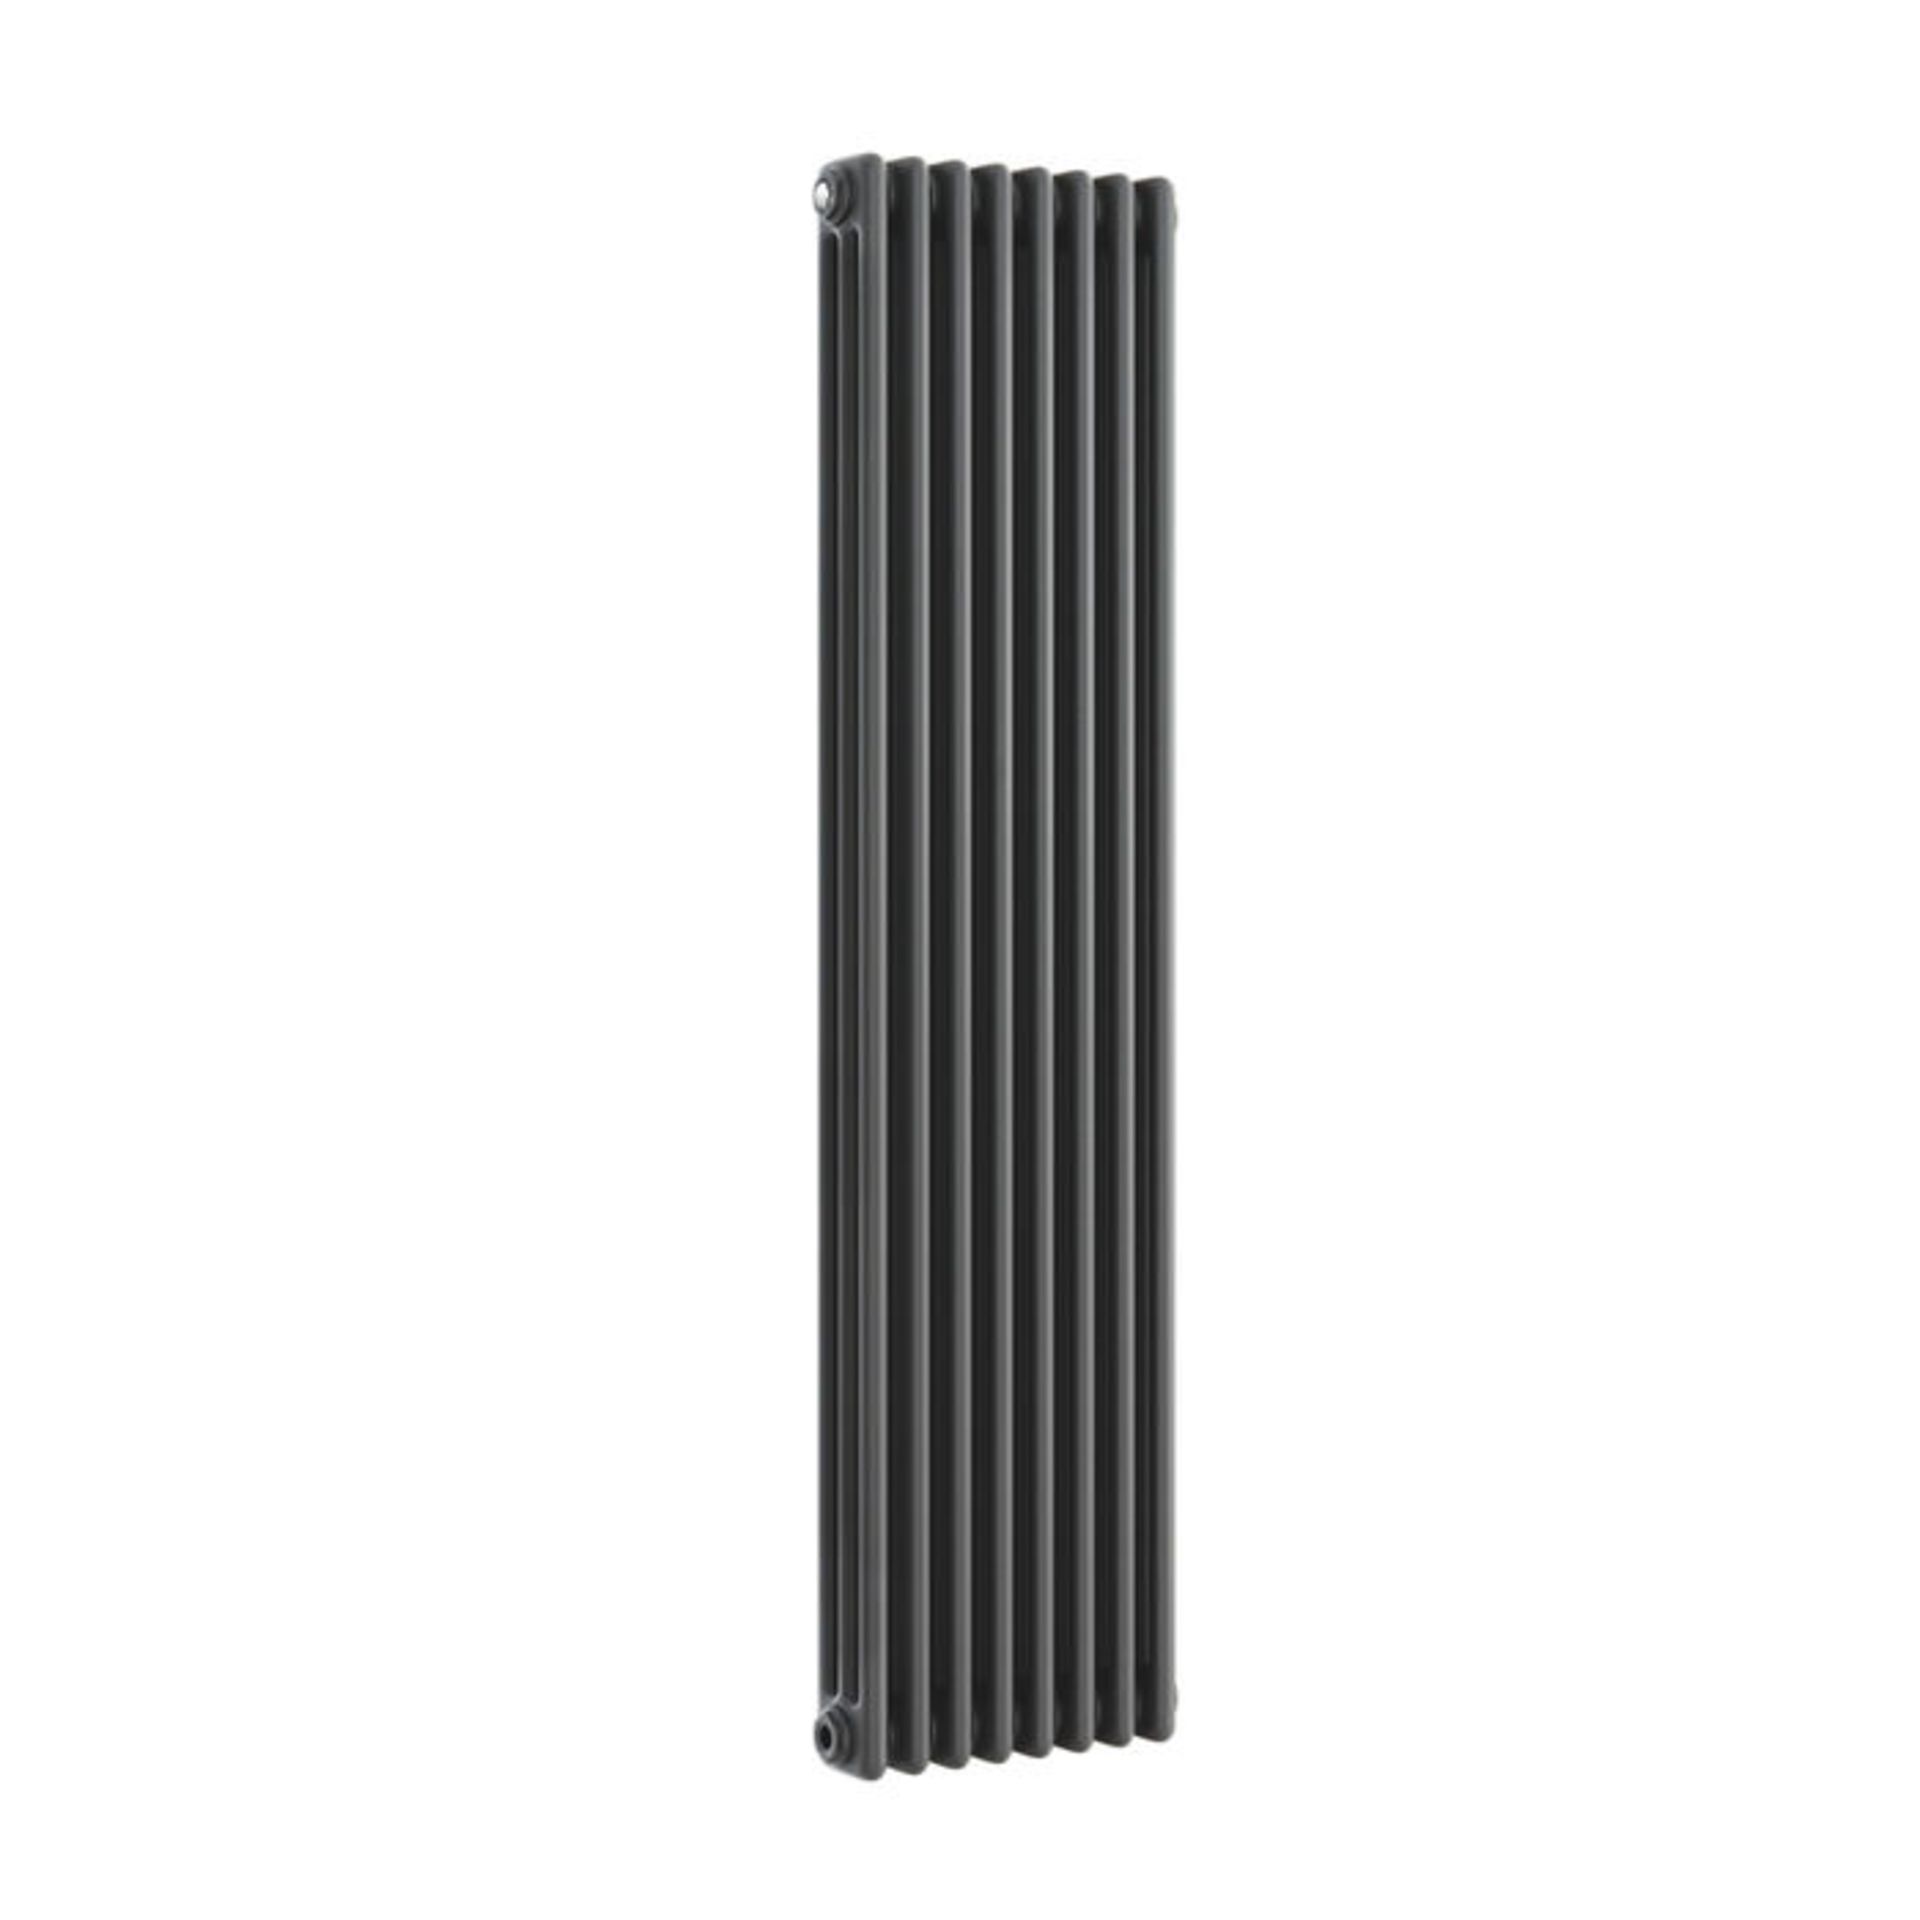 (W114) 1500x380mm Anthracite Triple Panel Vertical Colosseum Traditional Radiator. RRP £399.99. Made - Image 4 of 4